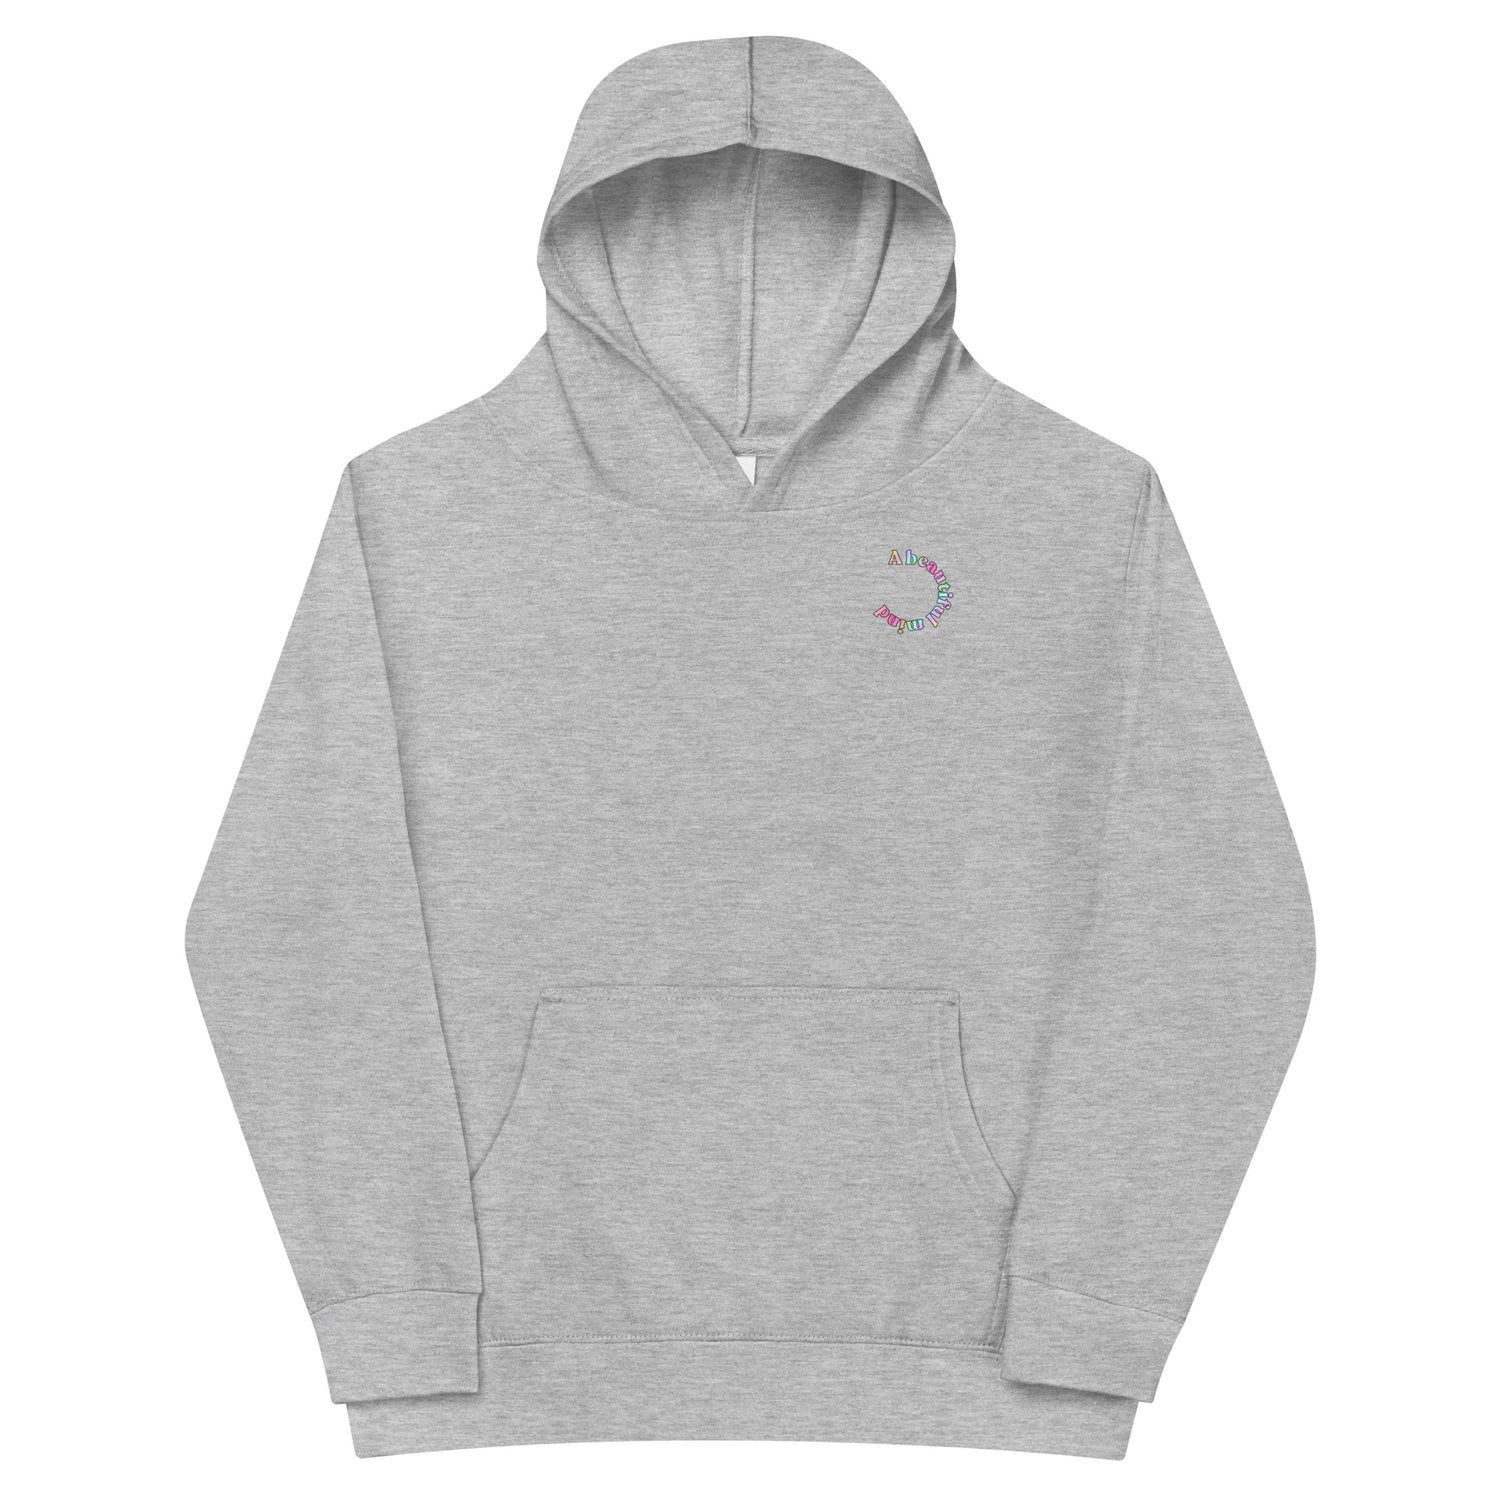 Grey Kidswear hoodie featuring  " A beautiful mind" design with pockets at front.